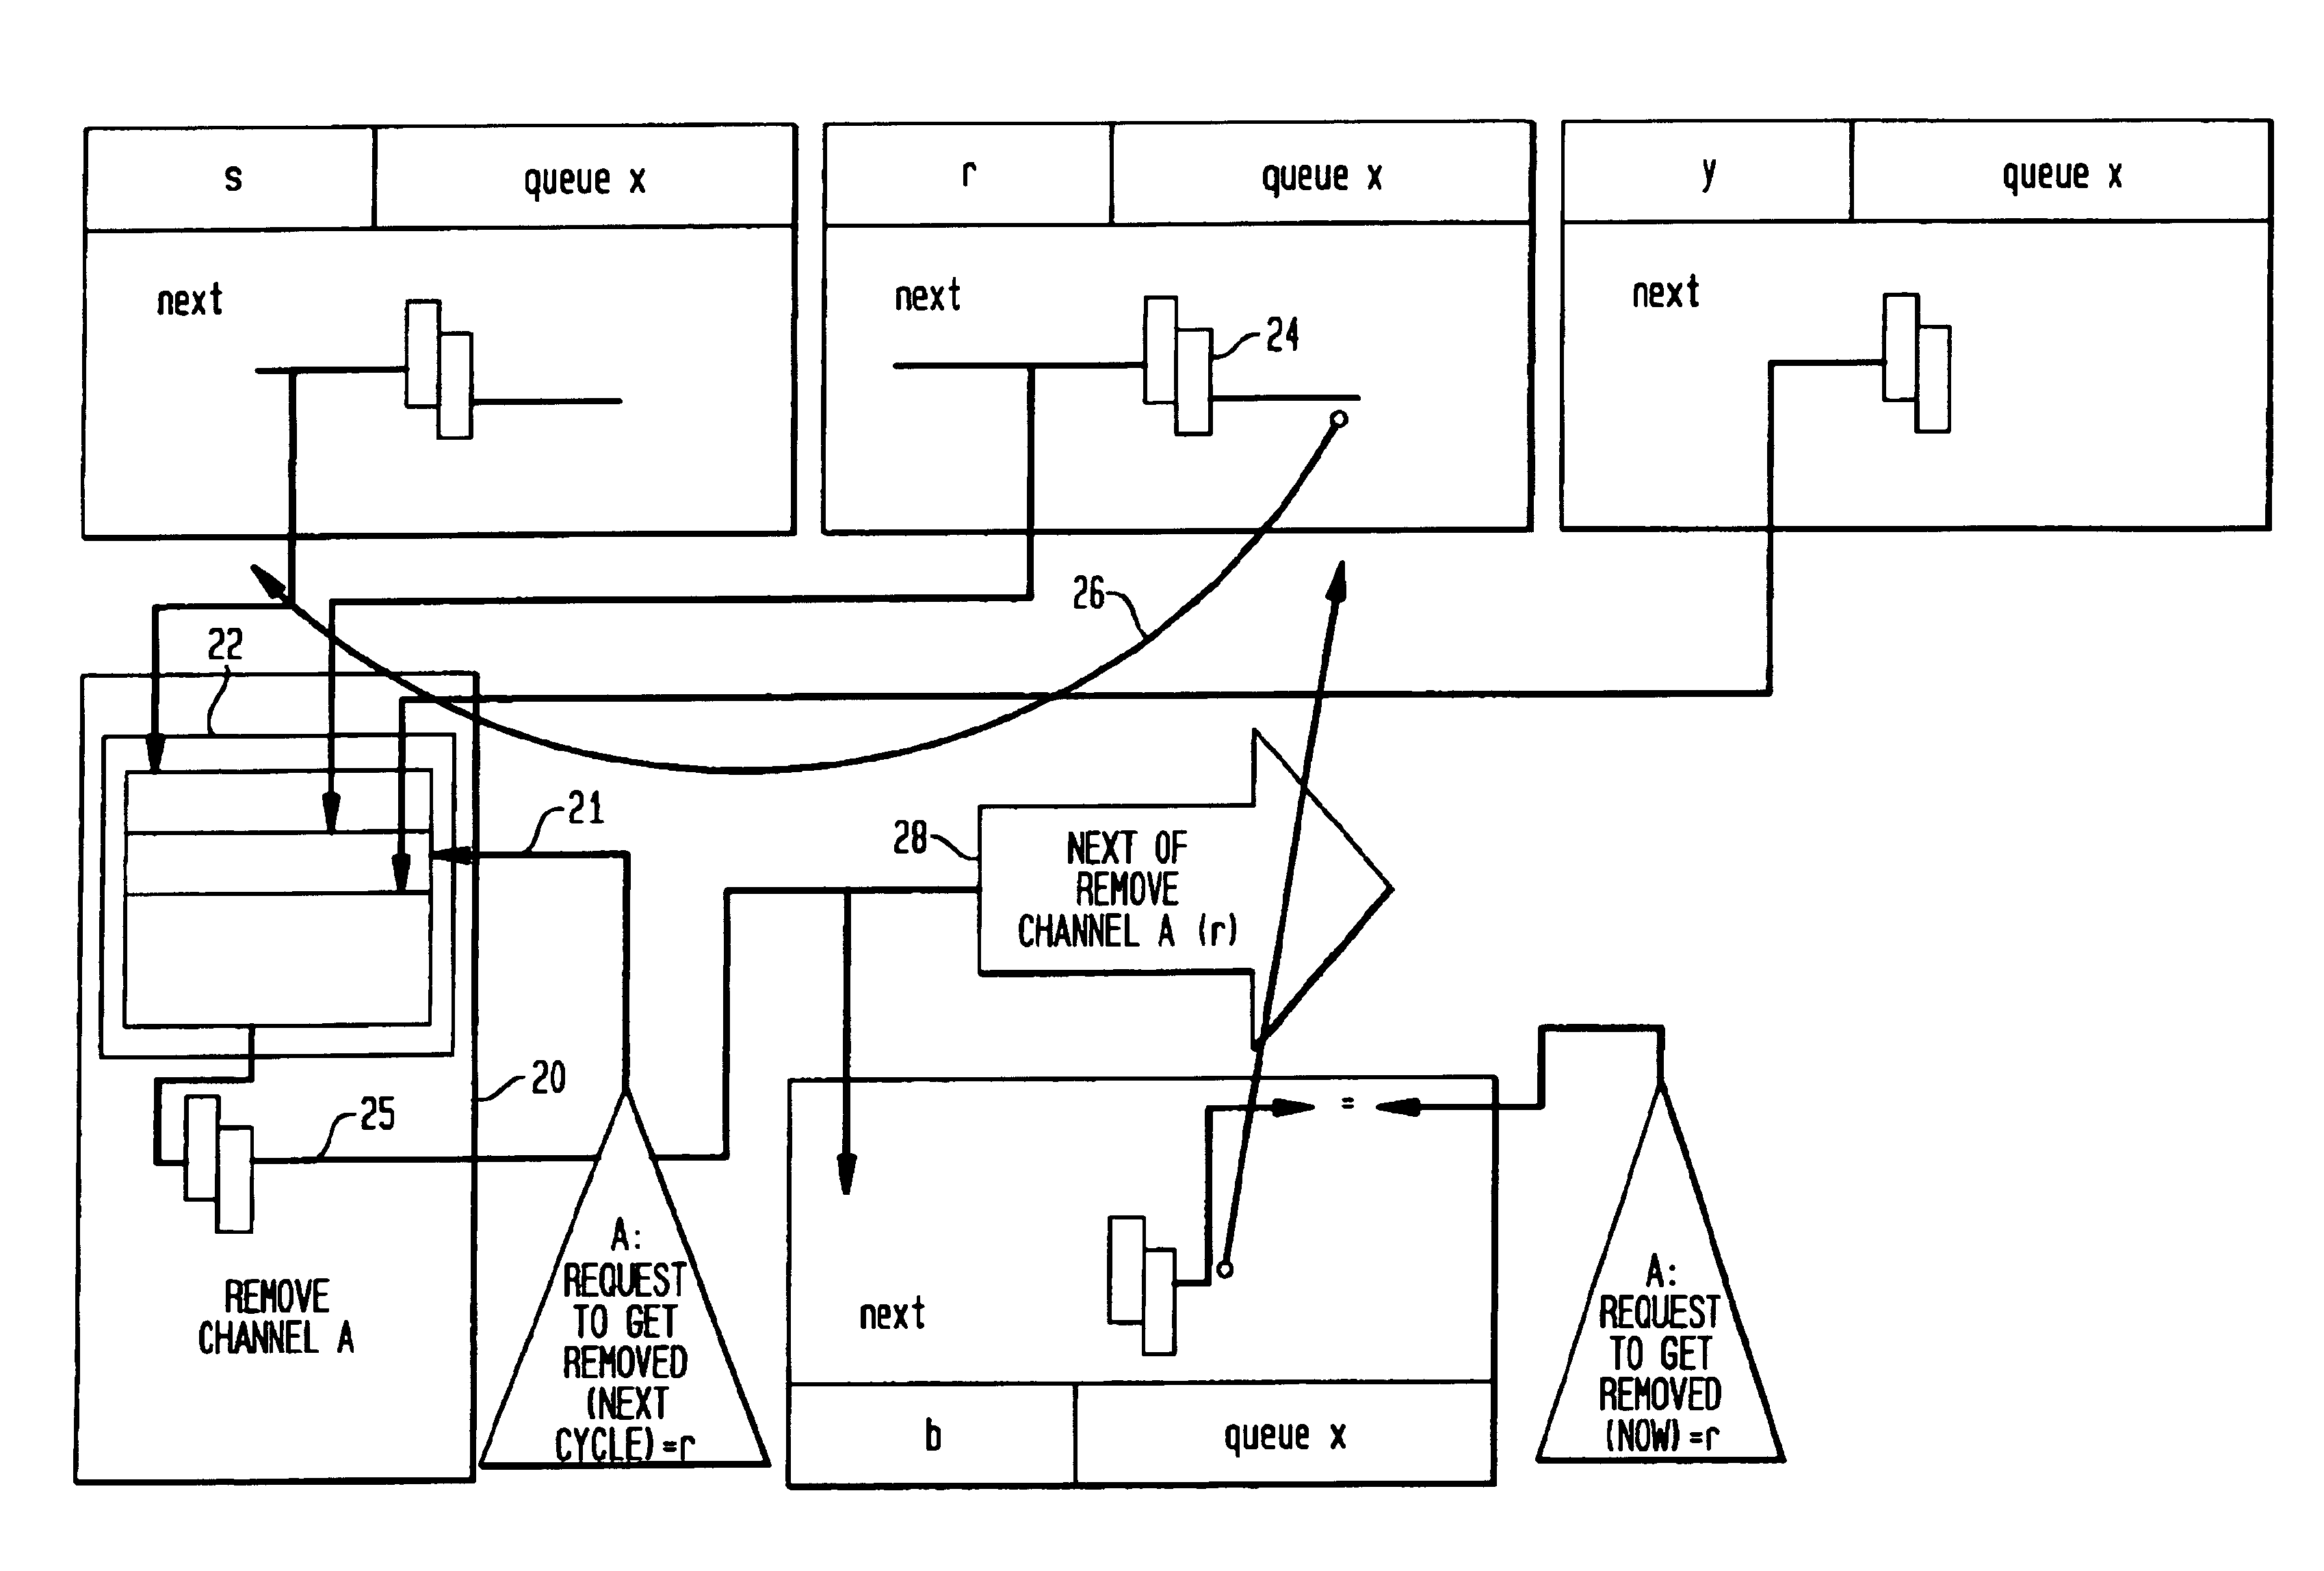 System for building electronic queue(s) utilizing self organizing units in parallel to permit concurrent queue add and remove operations